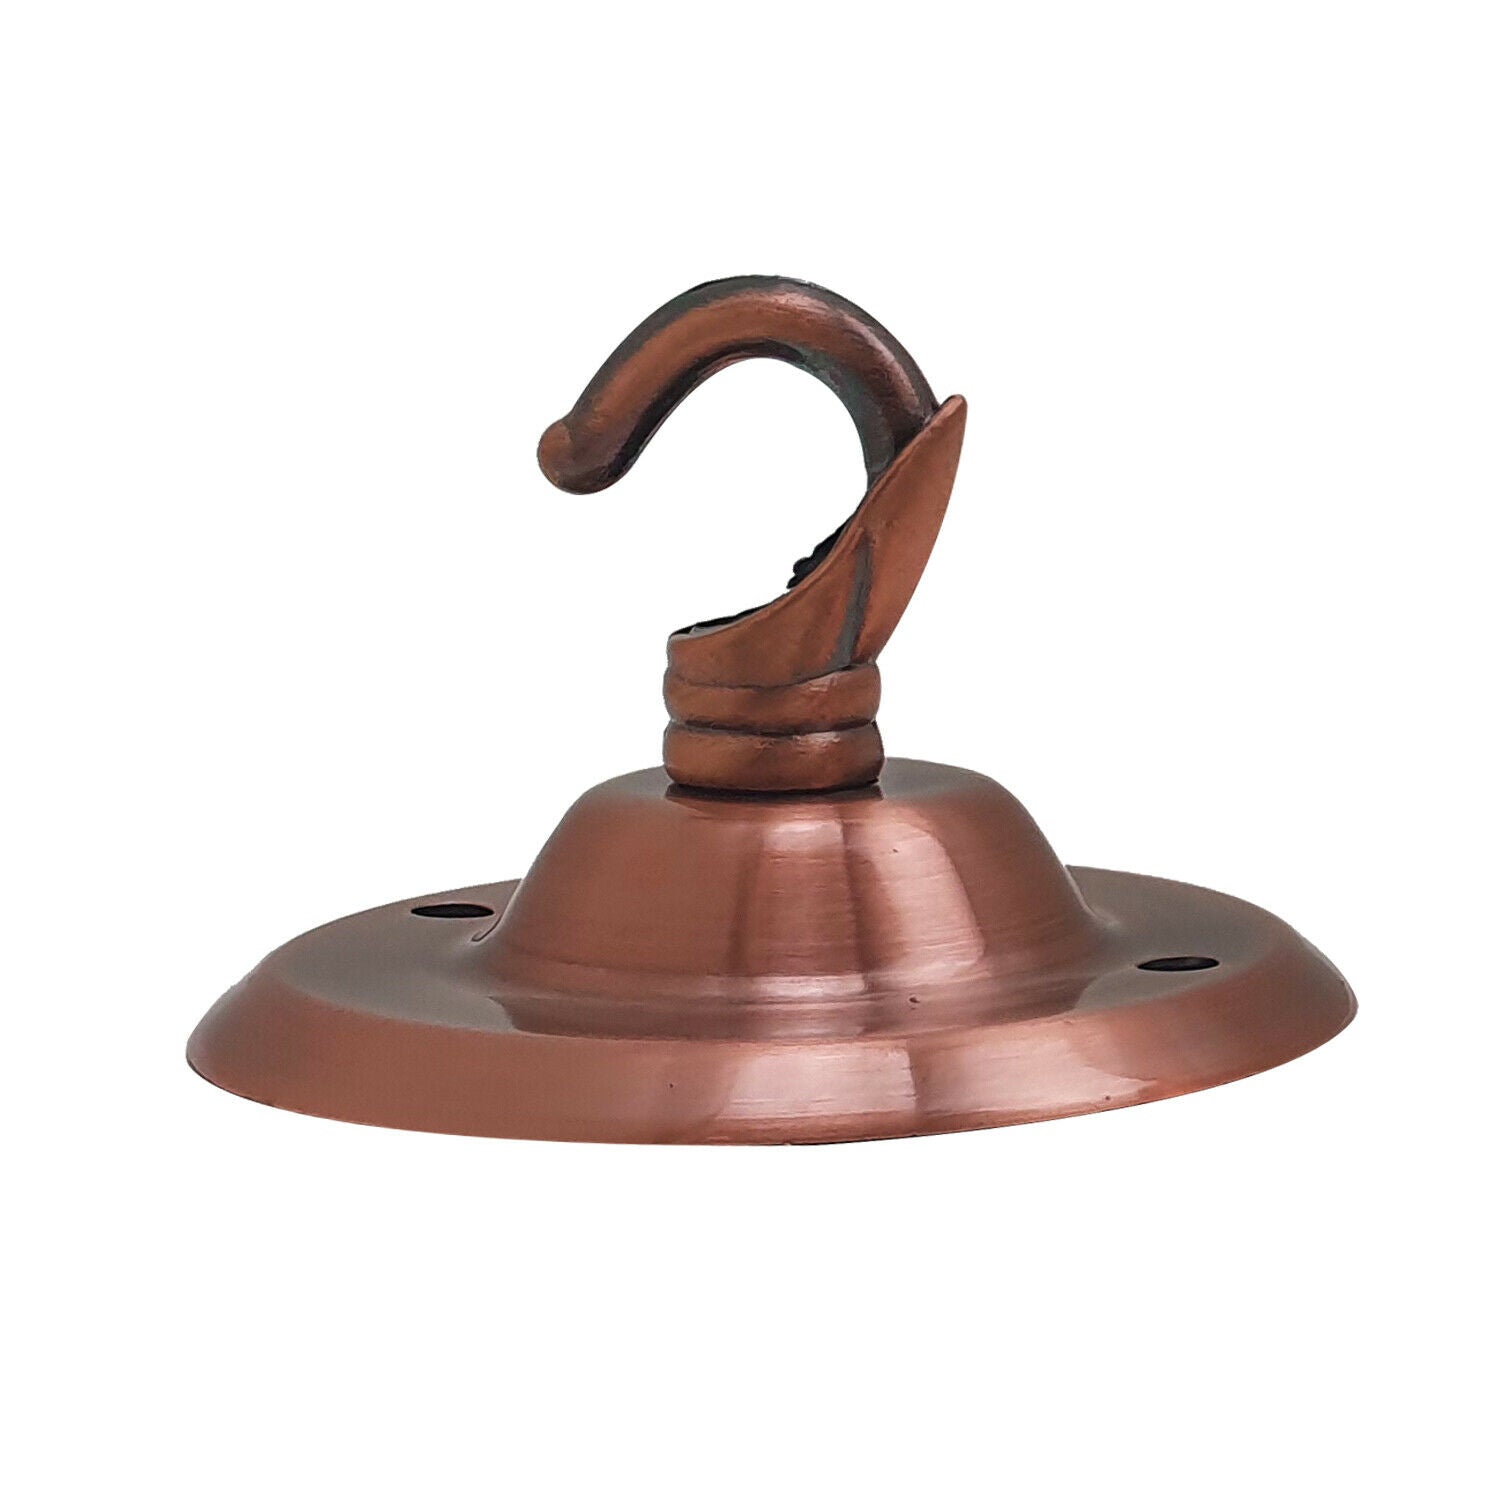 75mm Front Fitting Color Ceiling Hook With Single Point Drop Outlet Plate